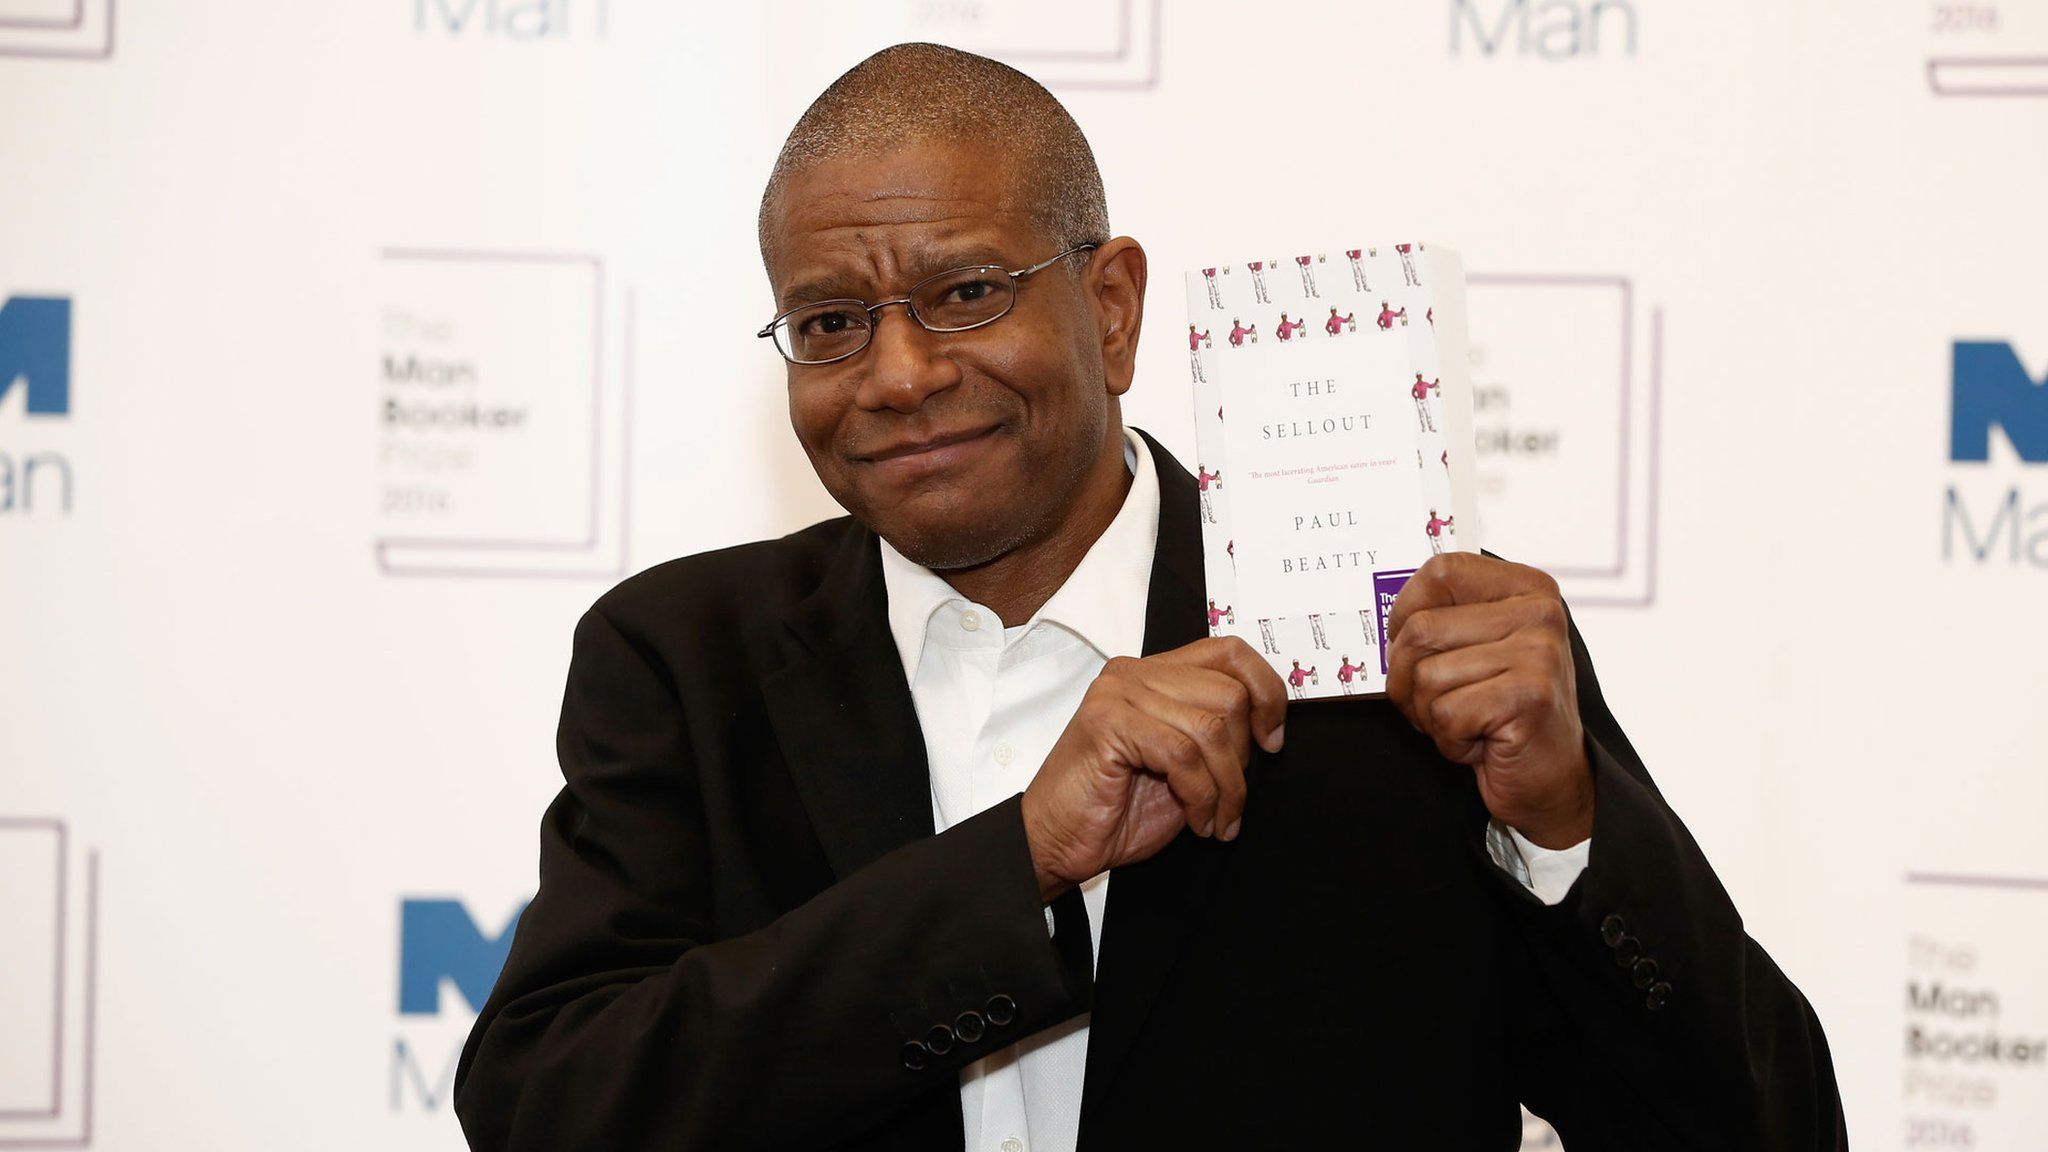 Paul Beatty and his book